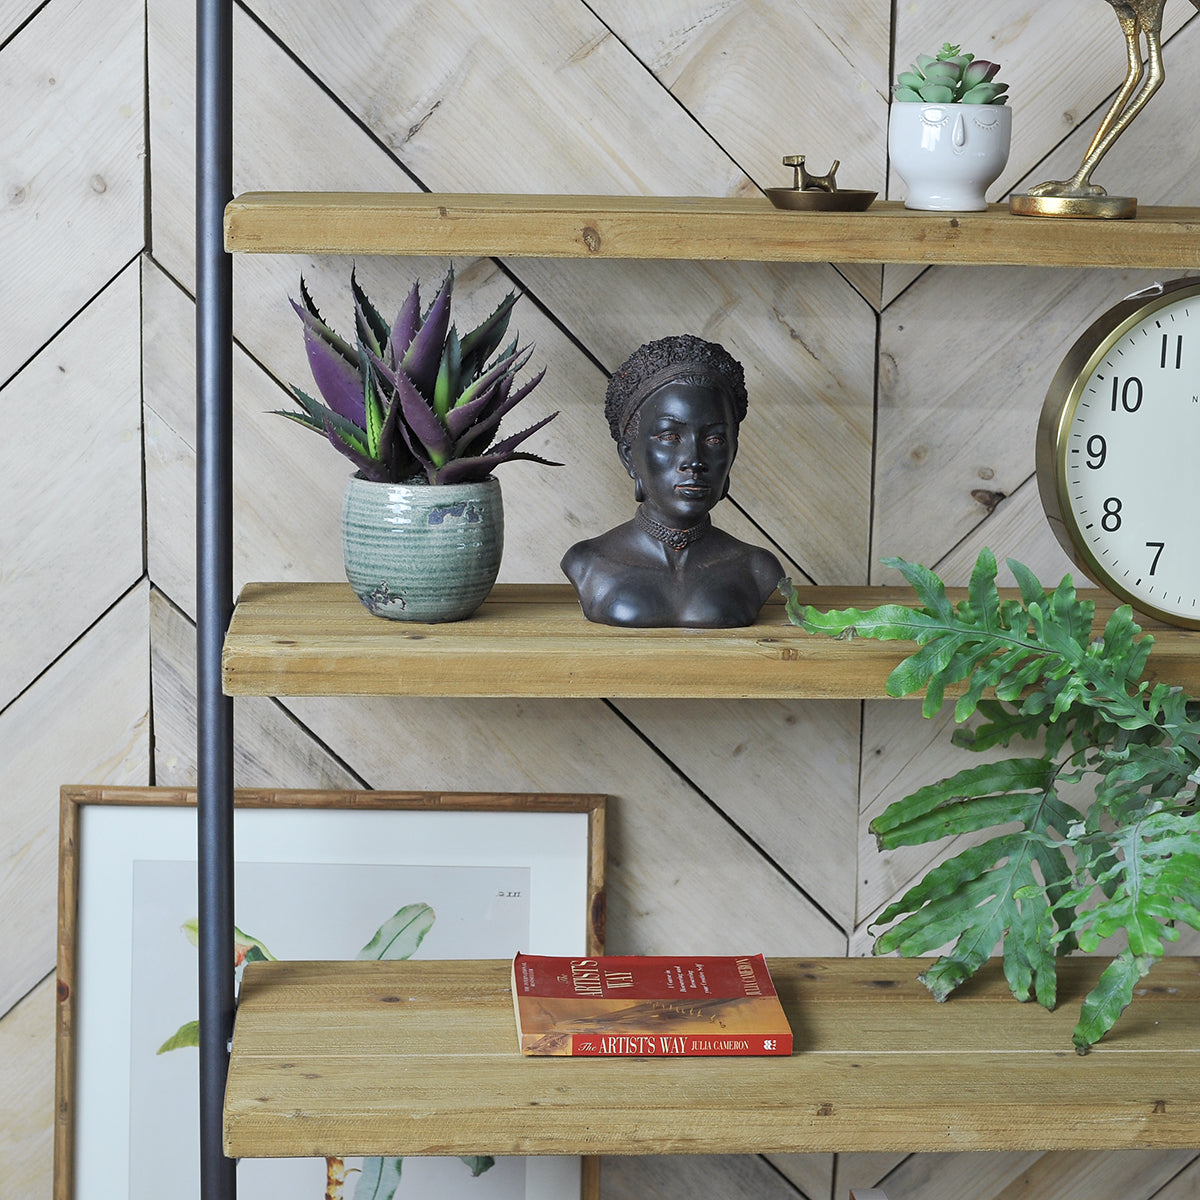 industrial-style wide leaning ladder shelves - Mrs Robinson